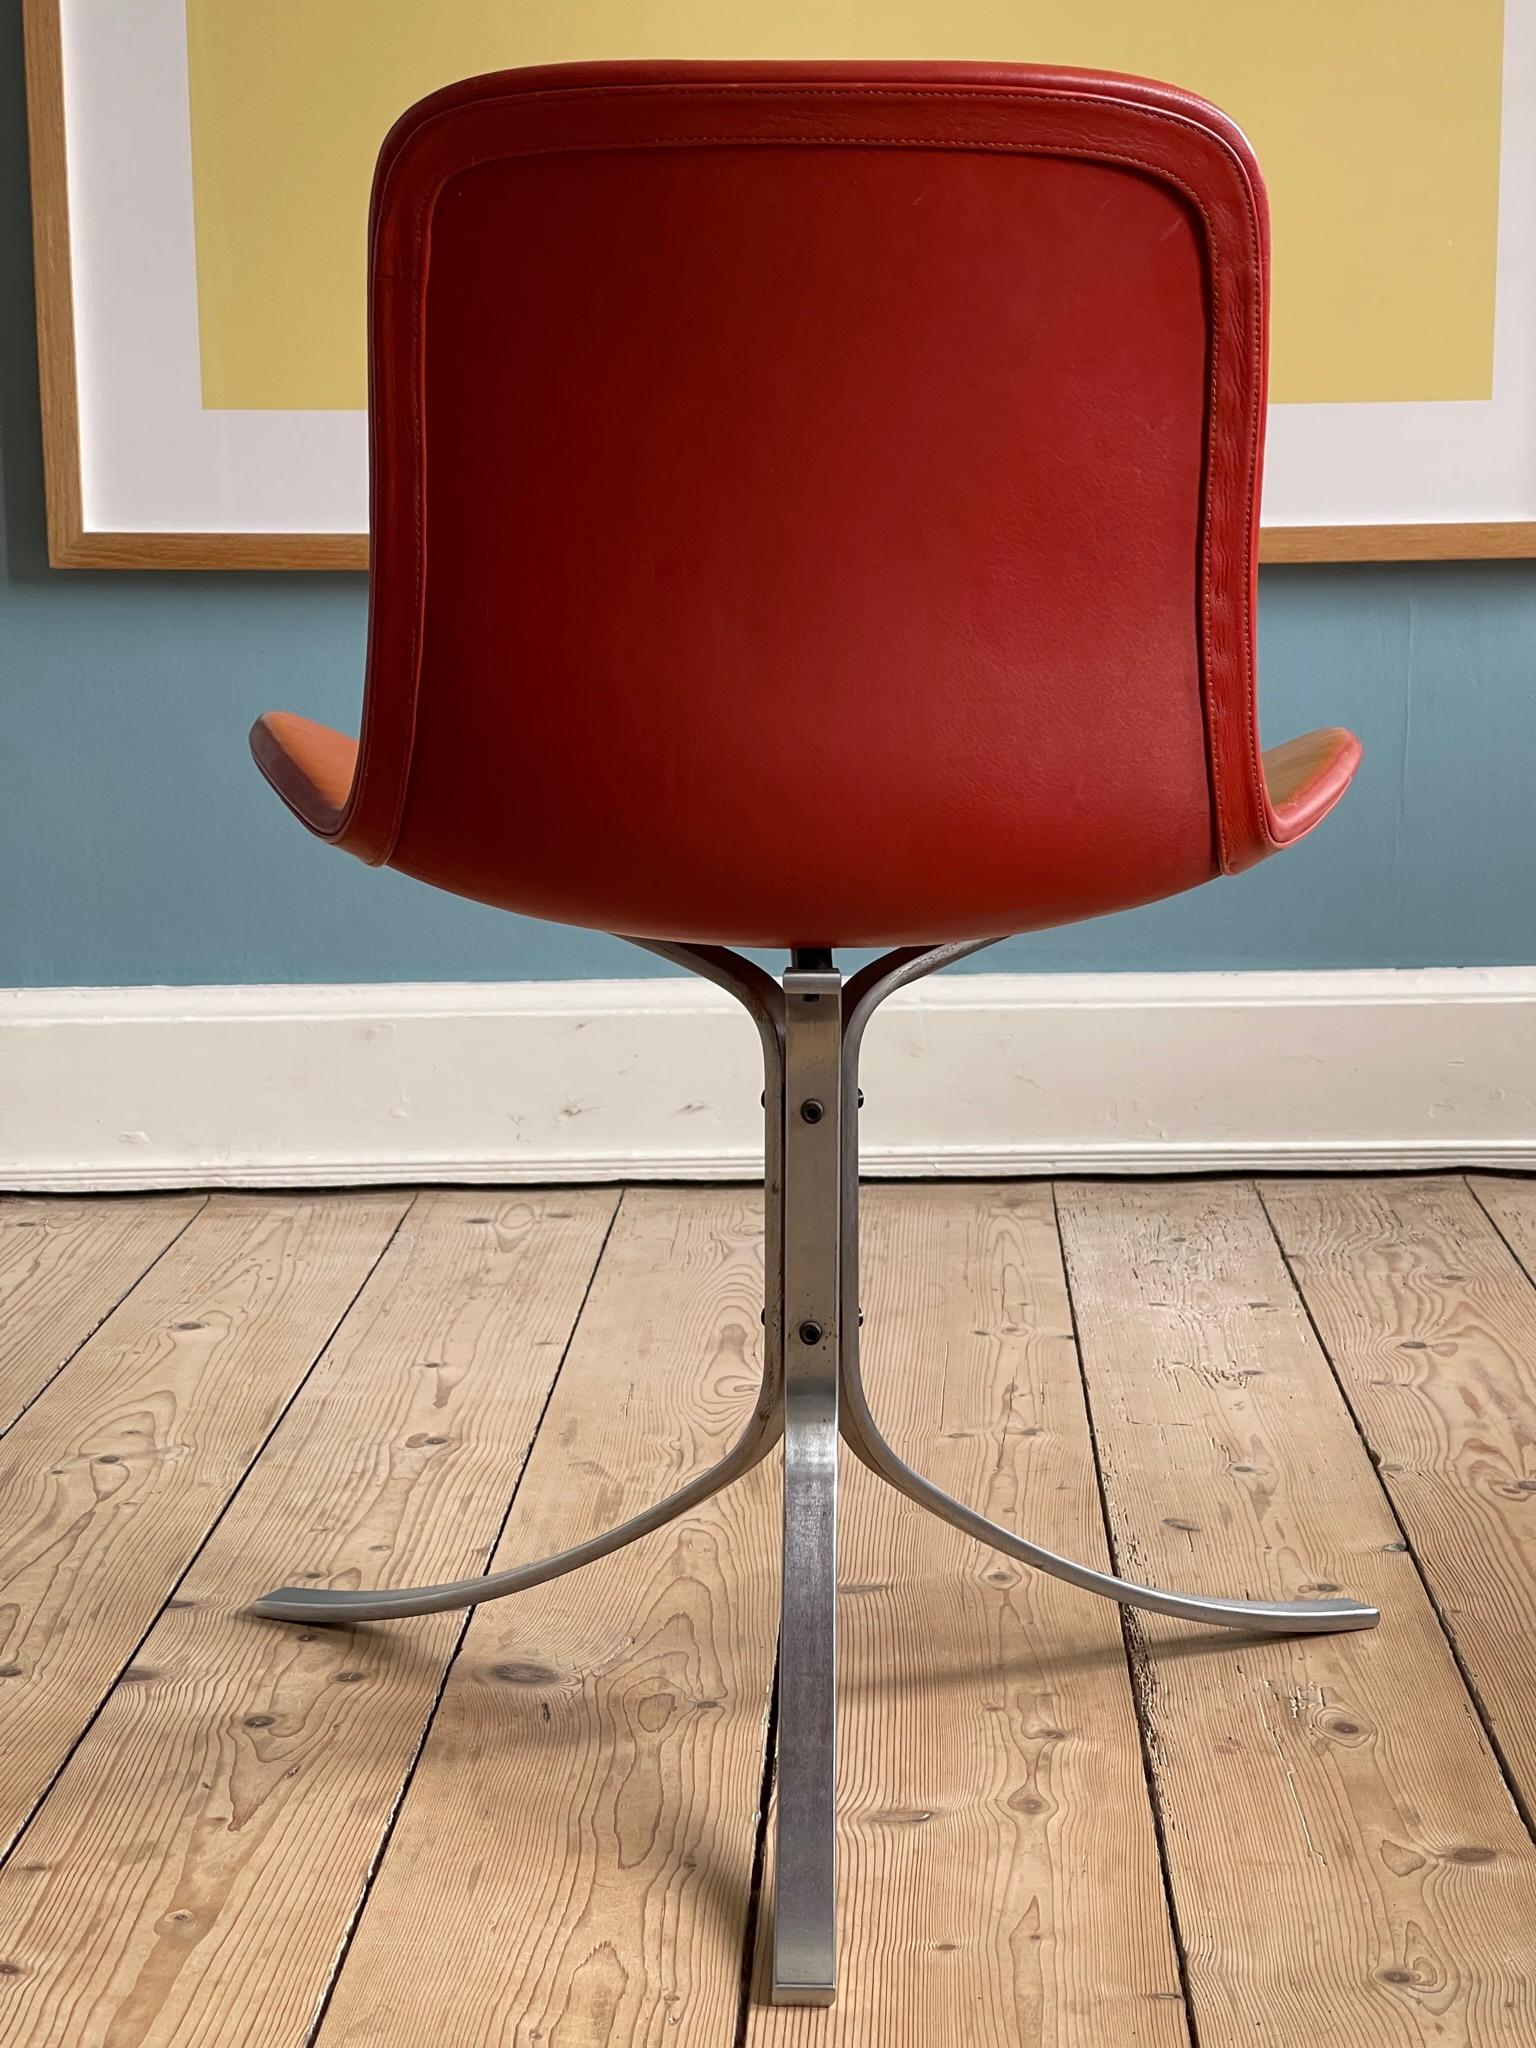 Set of 6 Patinated PK9 Dining Chairs by Poul Kjærholm for Fritz Hansen 1980s. 3